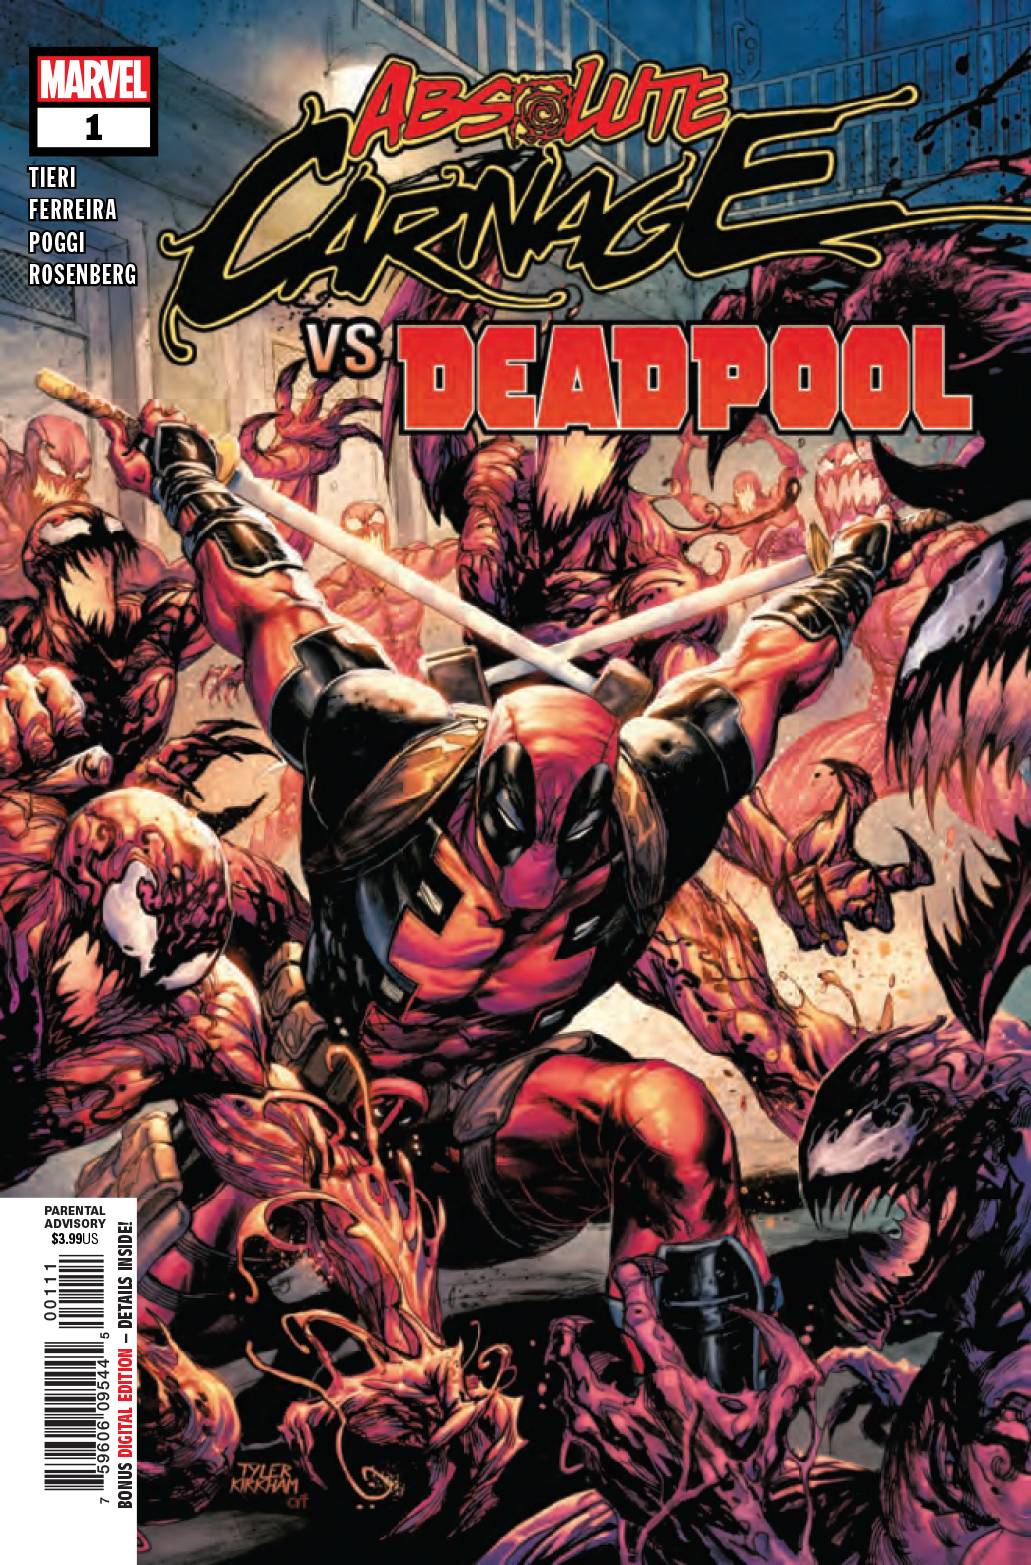 ABSOLUTE CARNAGE VS DEADPOOL #1 (OF 3) AC